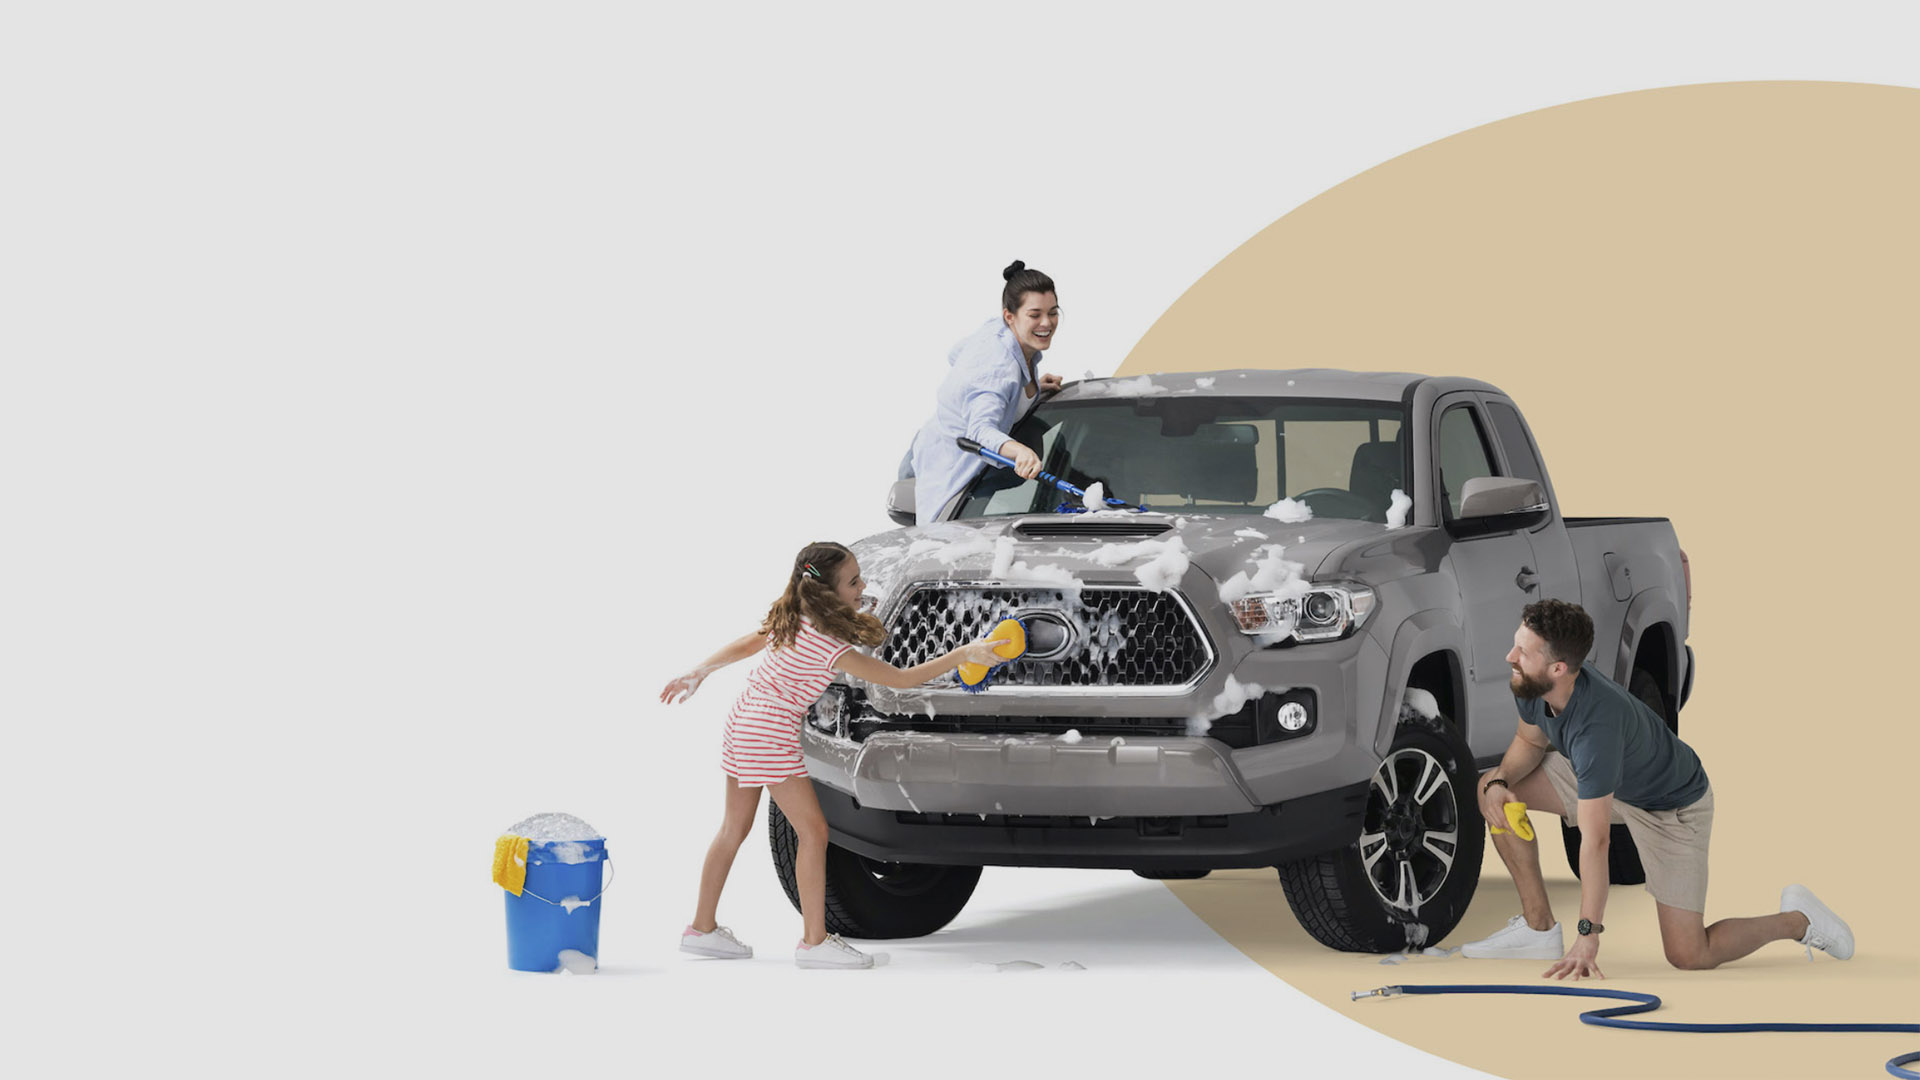 A family having fun while cleaning their truck on a solid white and beige background